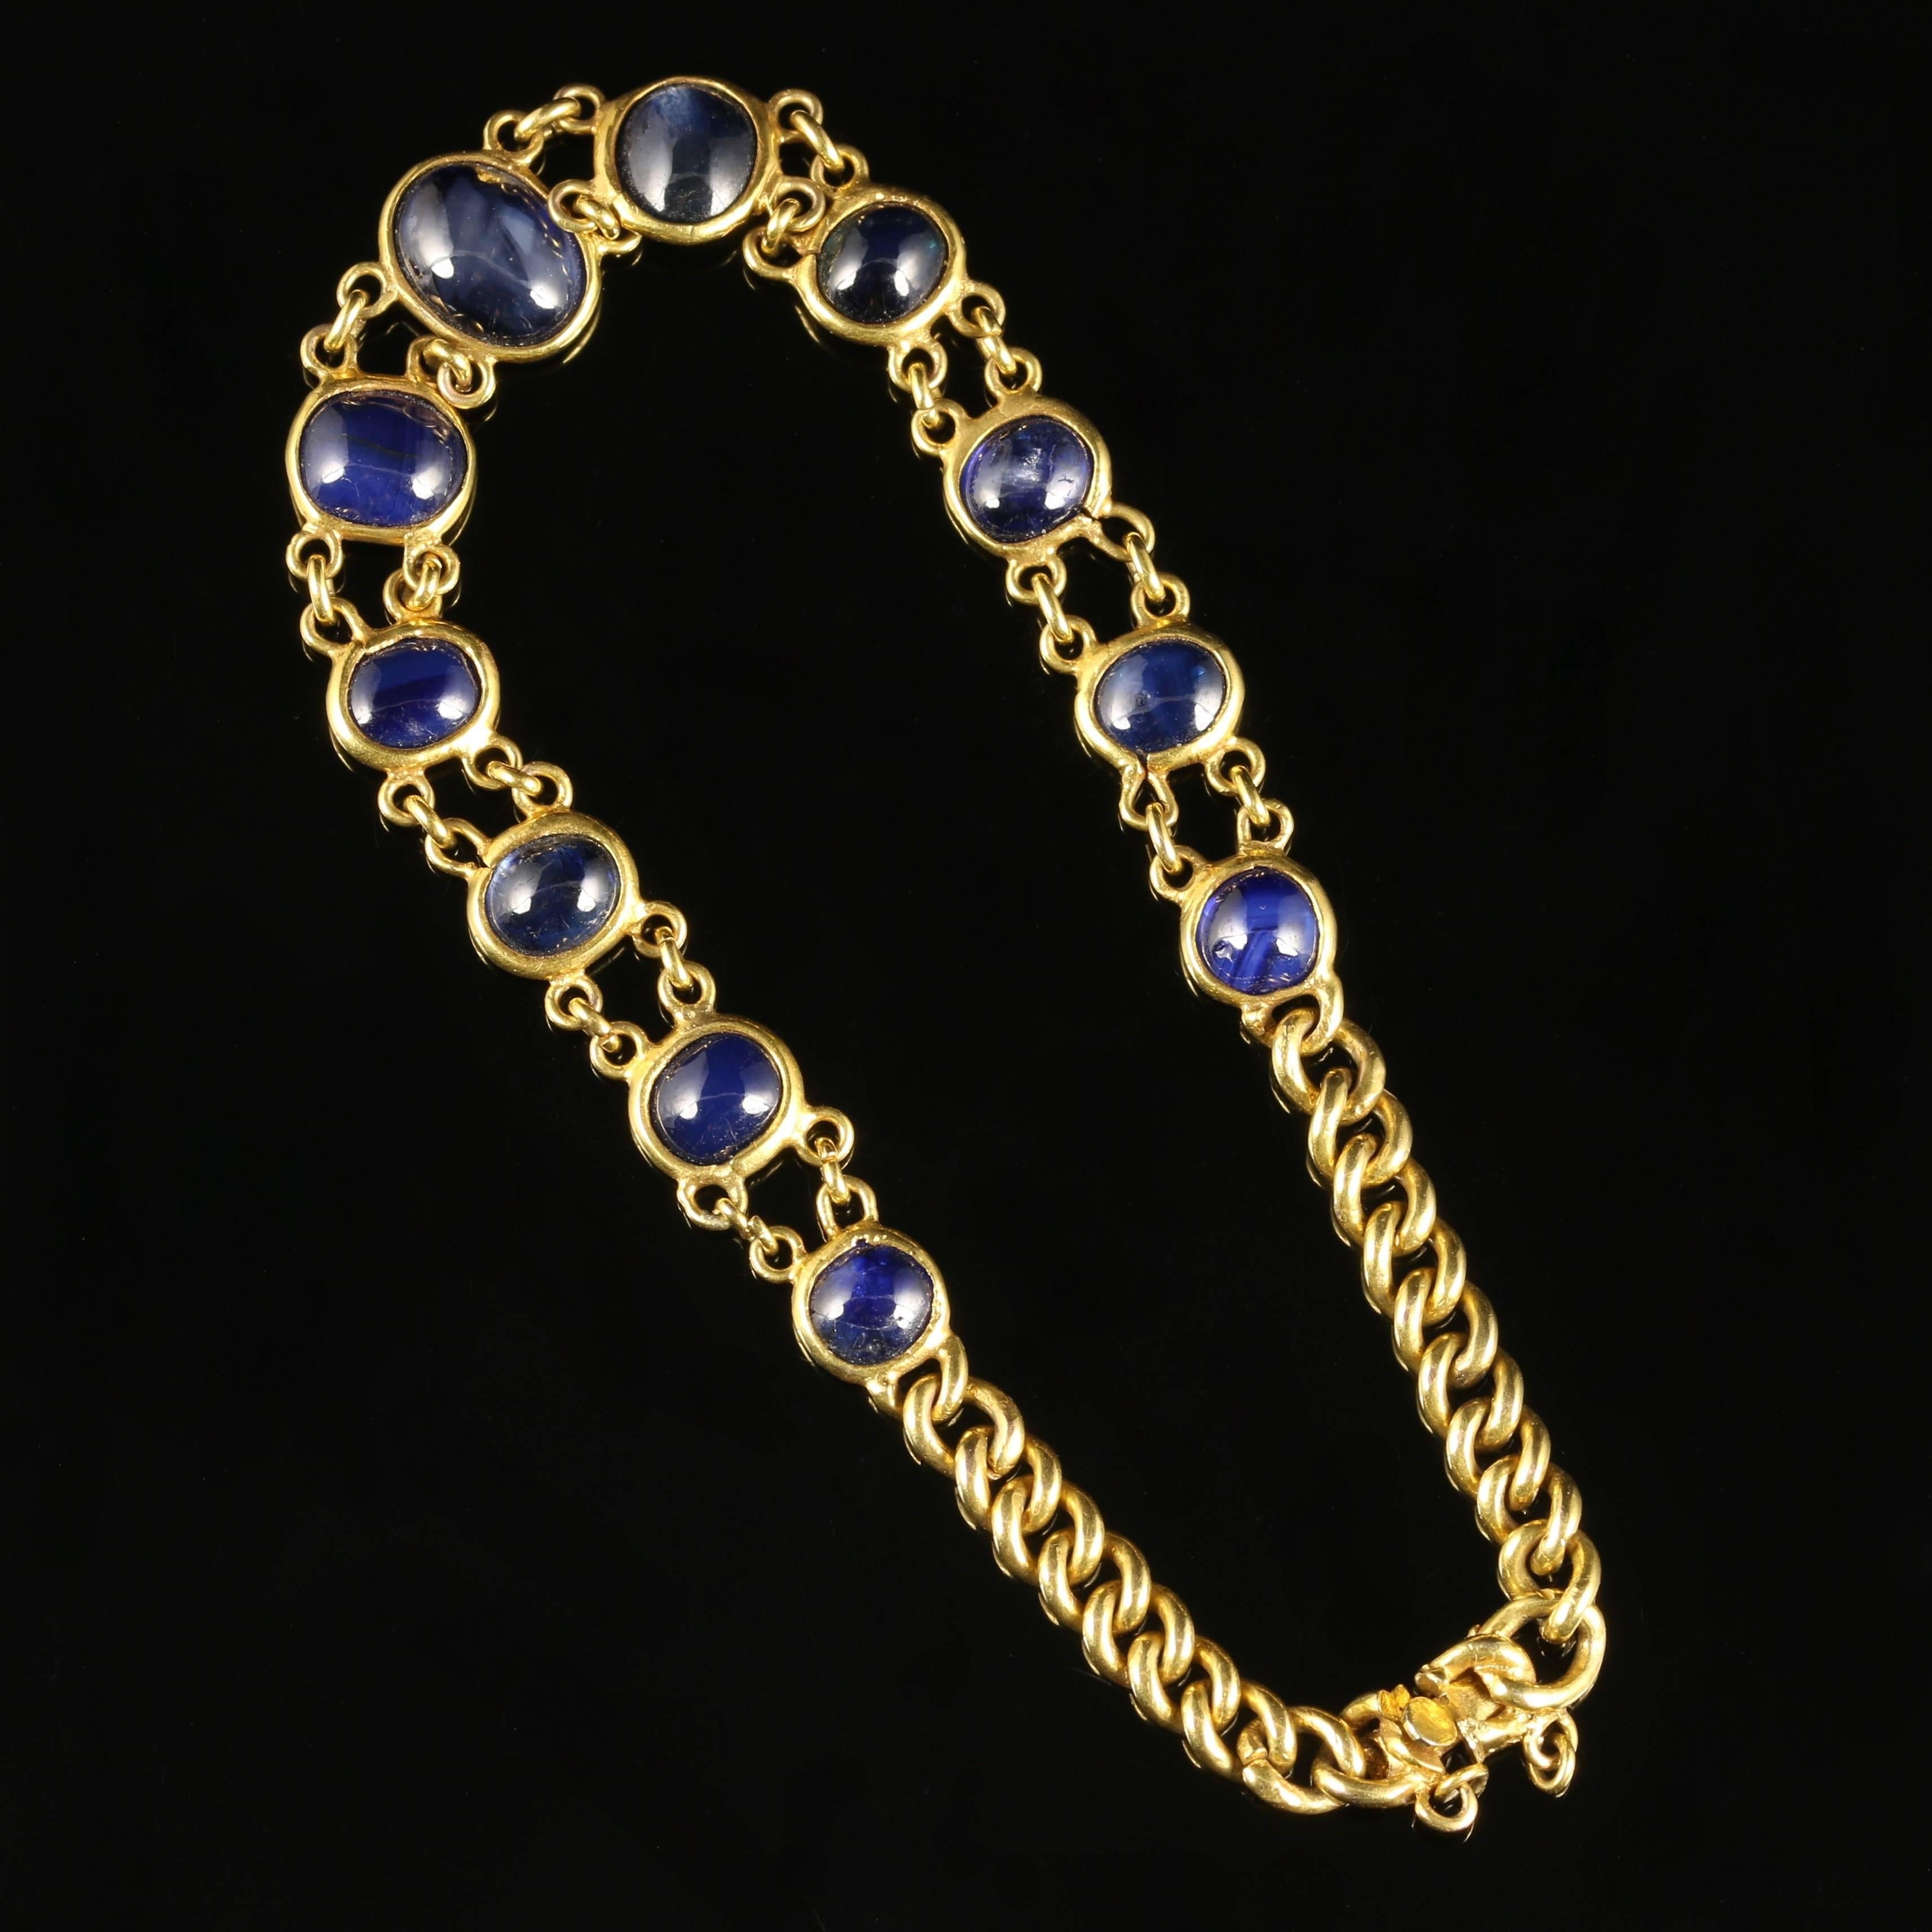 For more details please click continue reading down below...

This fabulous Antique Victorian Sapphire bracelet is Circa 1900.

Set with eleven graduated cabochon Sapphires which adorn this spectacular bracelet.

Sapphire is the symbol of feelings